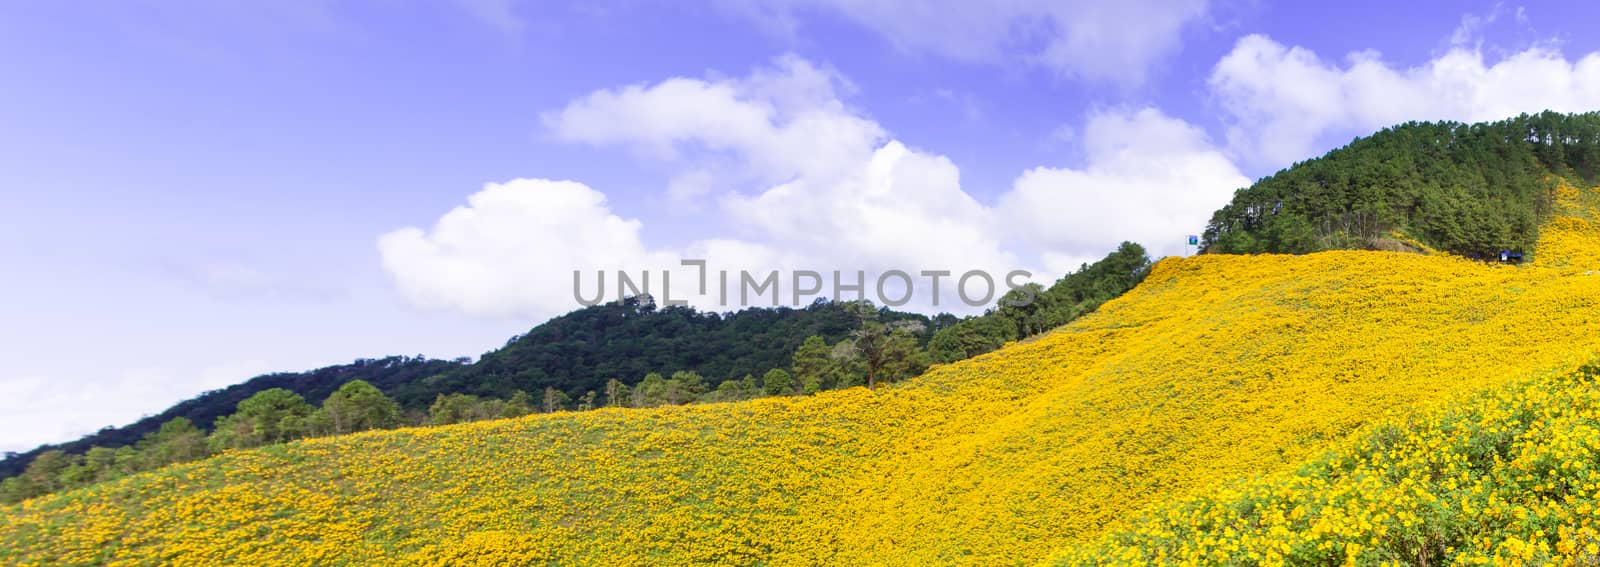 Field of yellow flowers Situated on the foothills of the mountains Cloud covered the sky